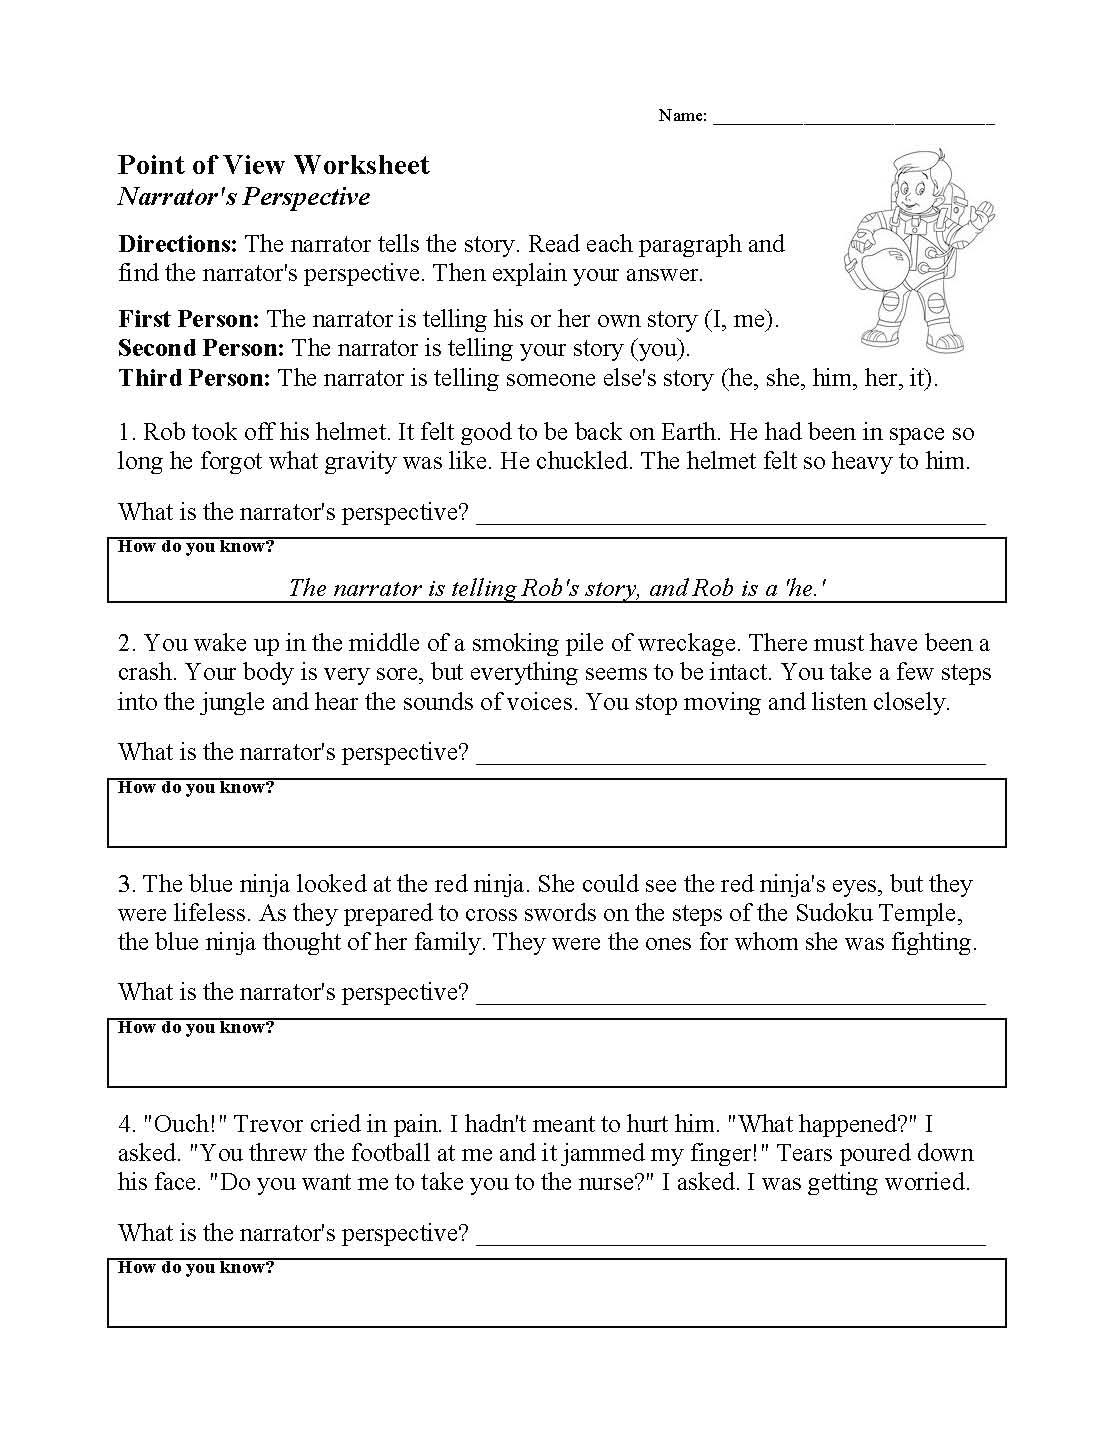 Point of View Worksheet  Elements of Fiction Activity With Point Of View Worksheet